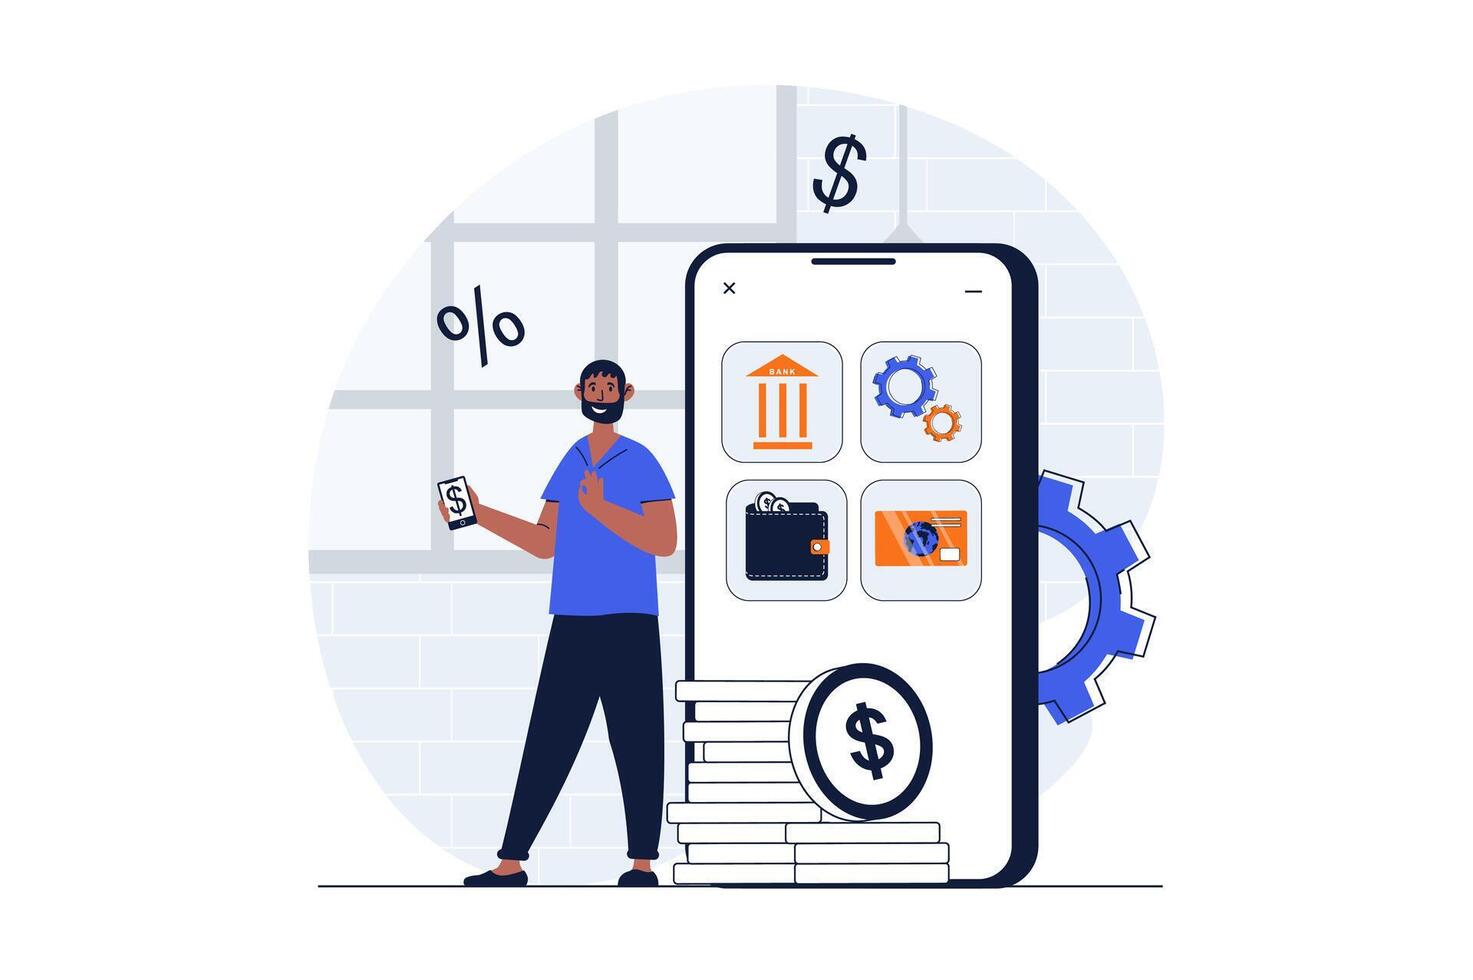 Mobile banking web concept with character scene. Man manages finances and banking services in smartphone app. People situation in flat design. Vector illustration for social media marketing material.